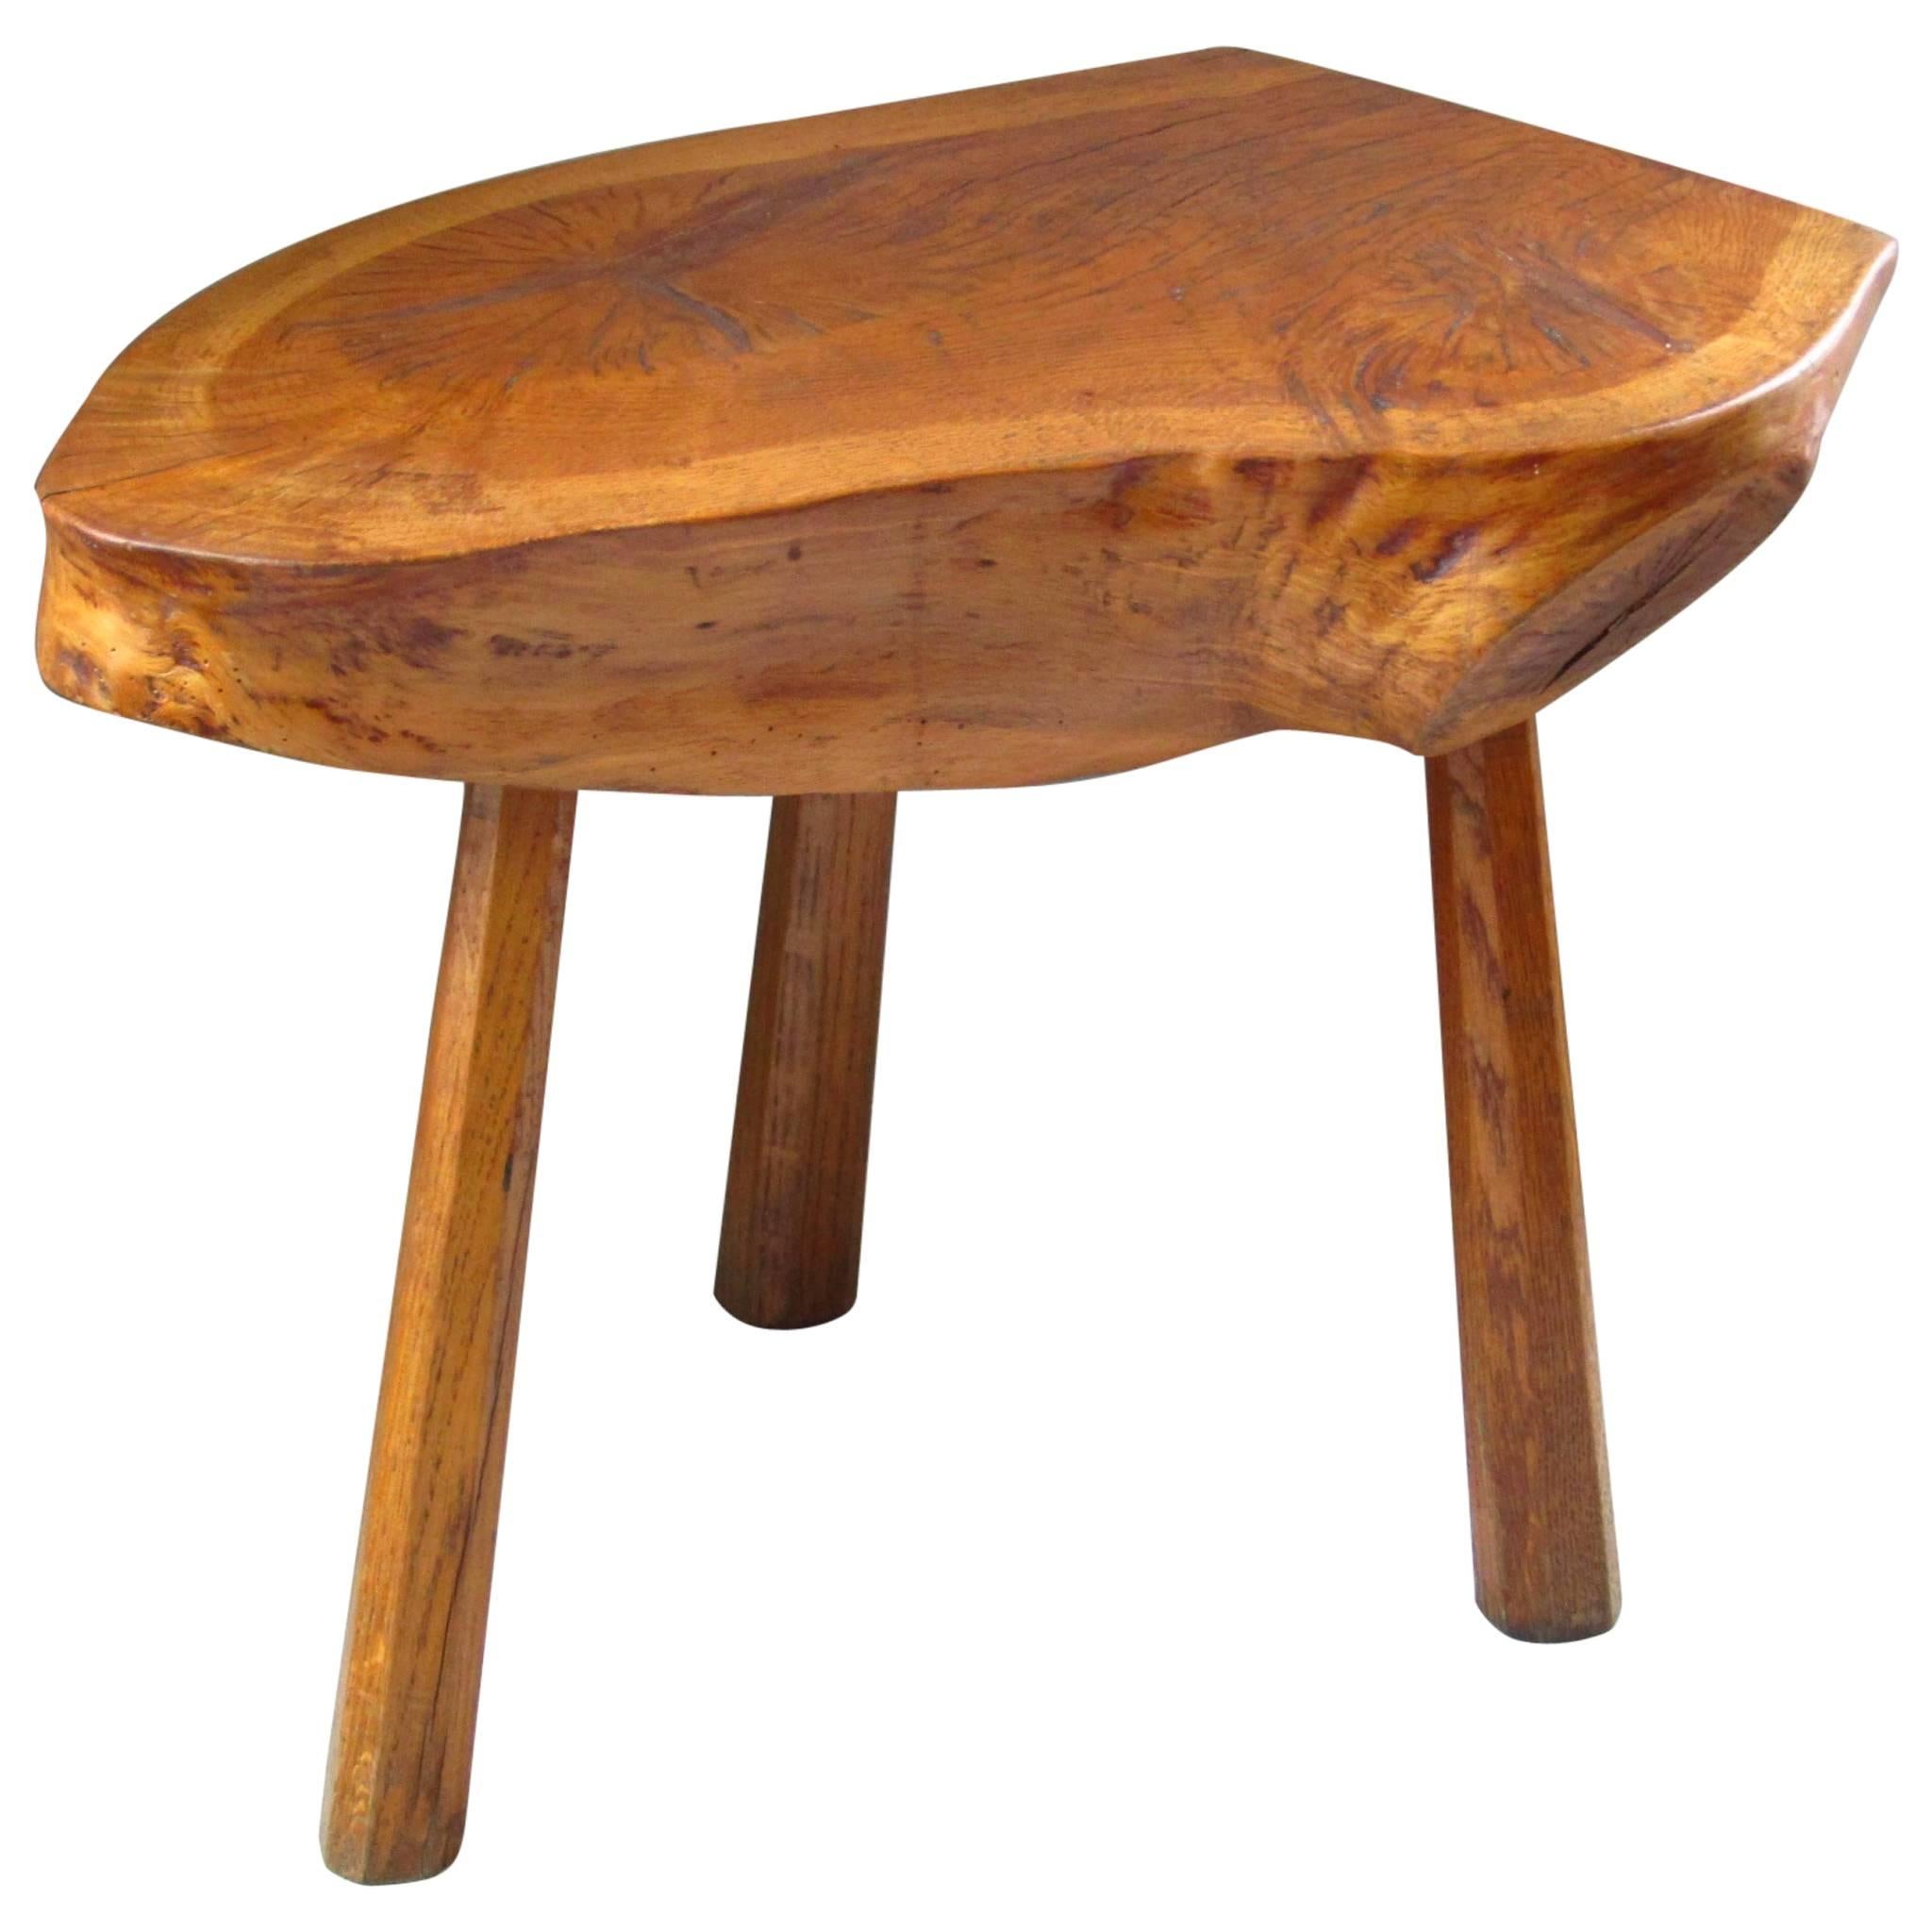 Midcentury Solid Wood Side Table Stool, Style of Charlotte Perriand